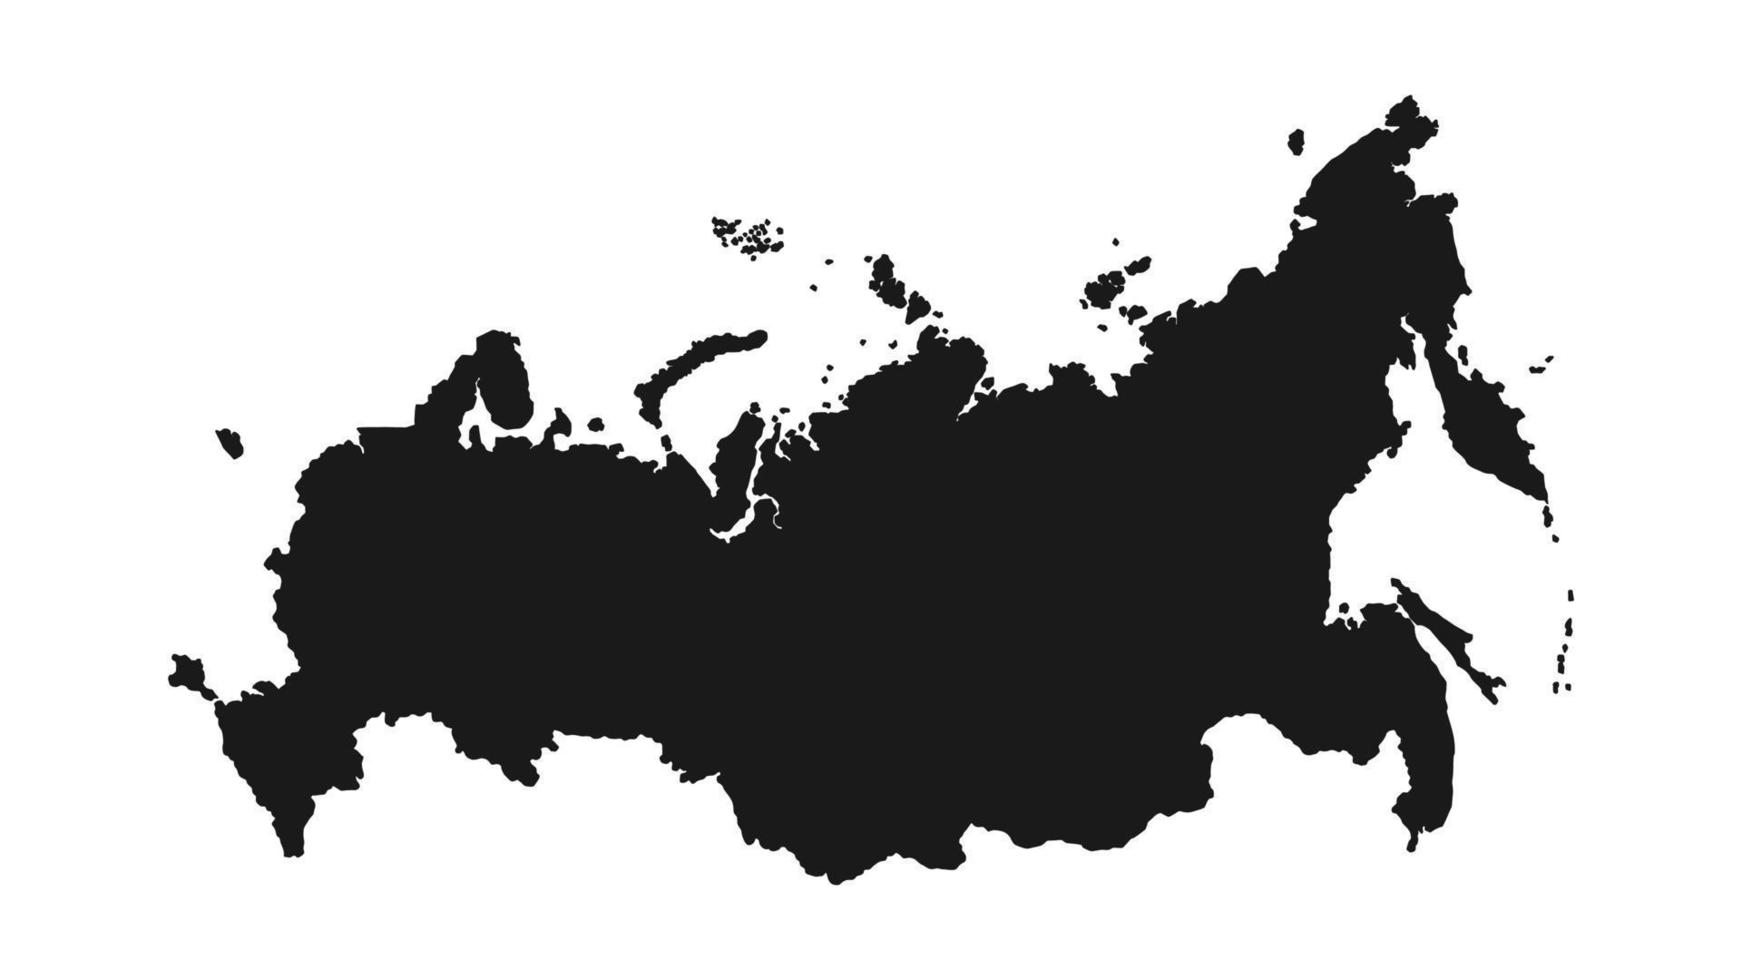 Russia map in black color isolated white background. Russia map vector illustration.